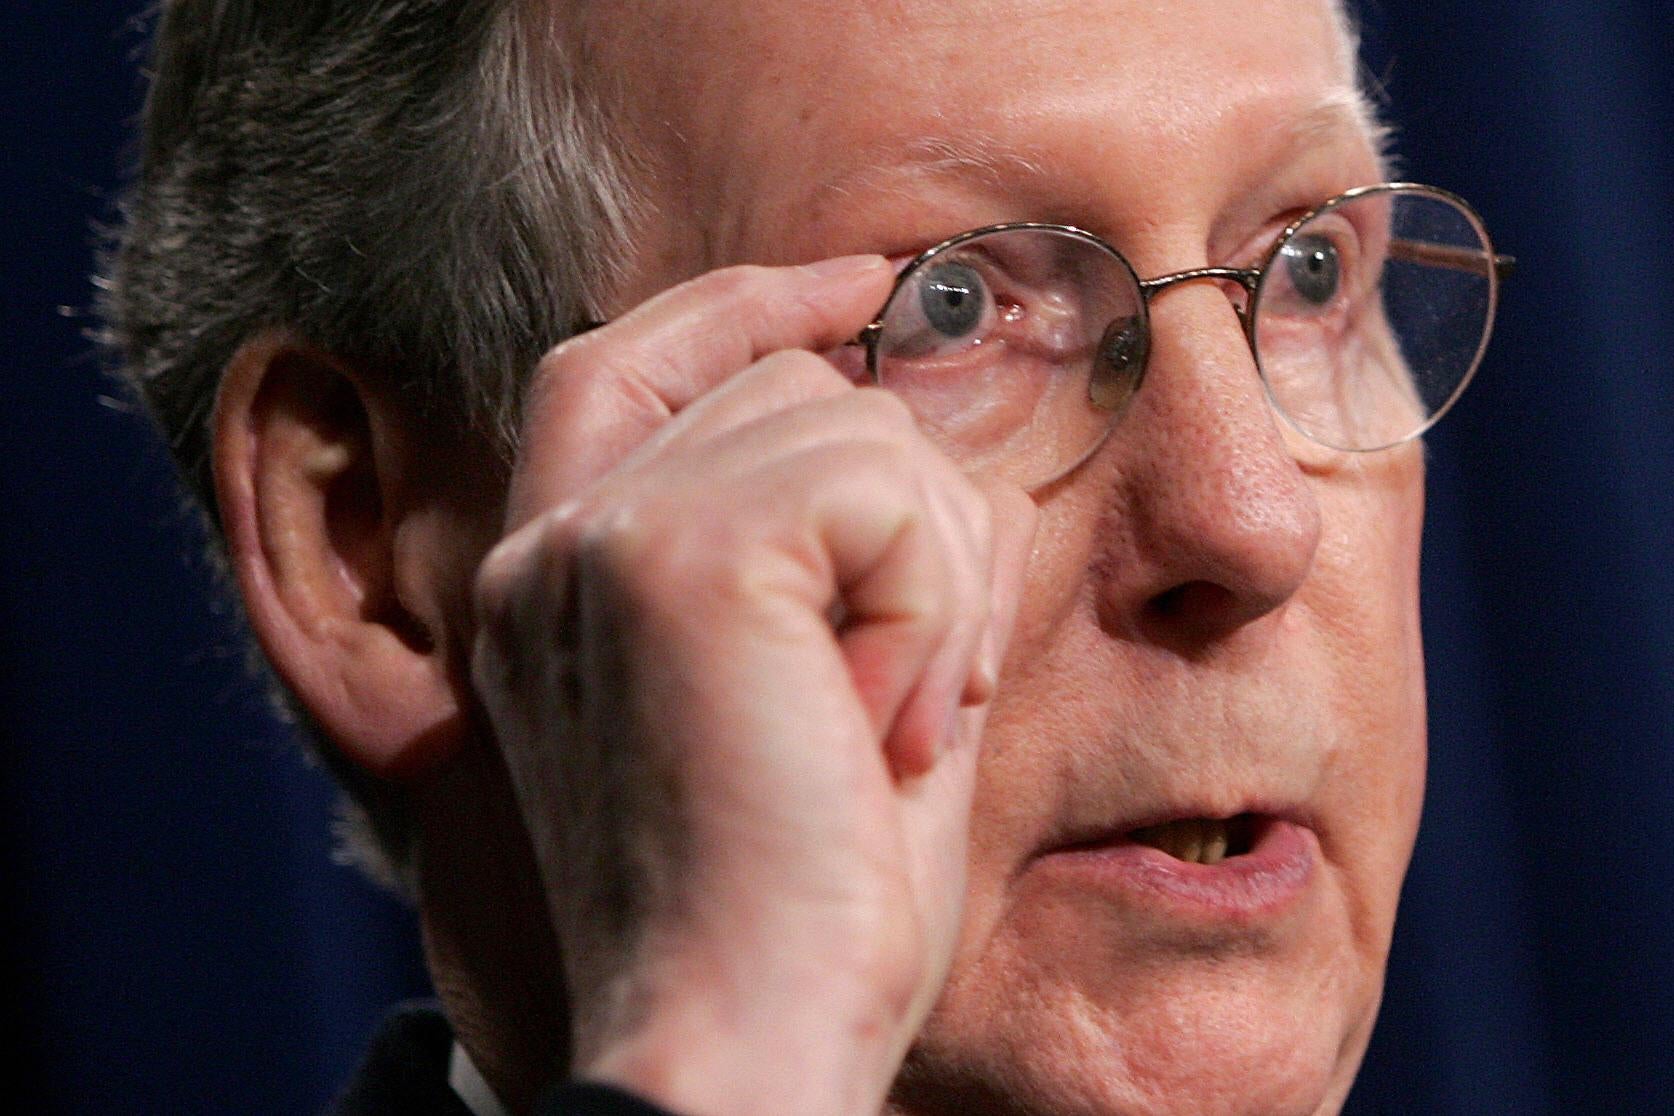 A close-up of Mitch McConnell's face, in which he puts his hand to his glasses